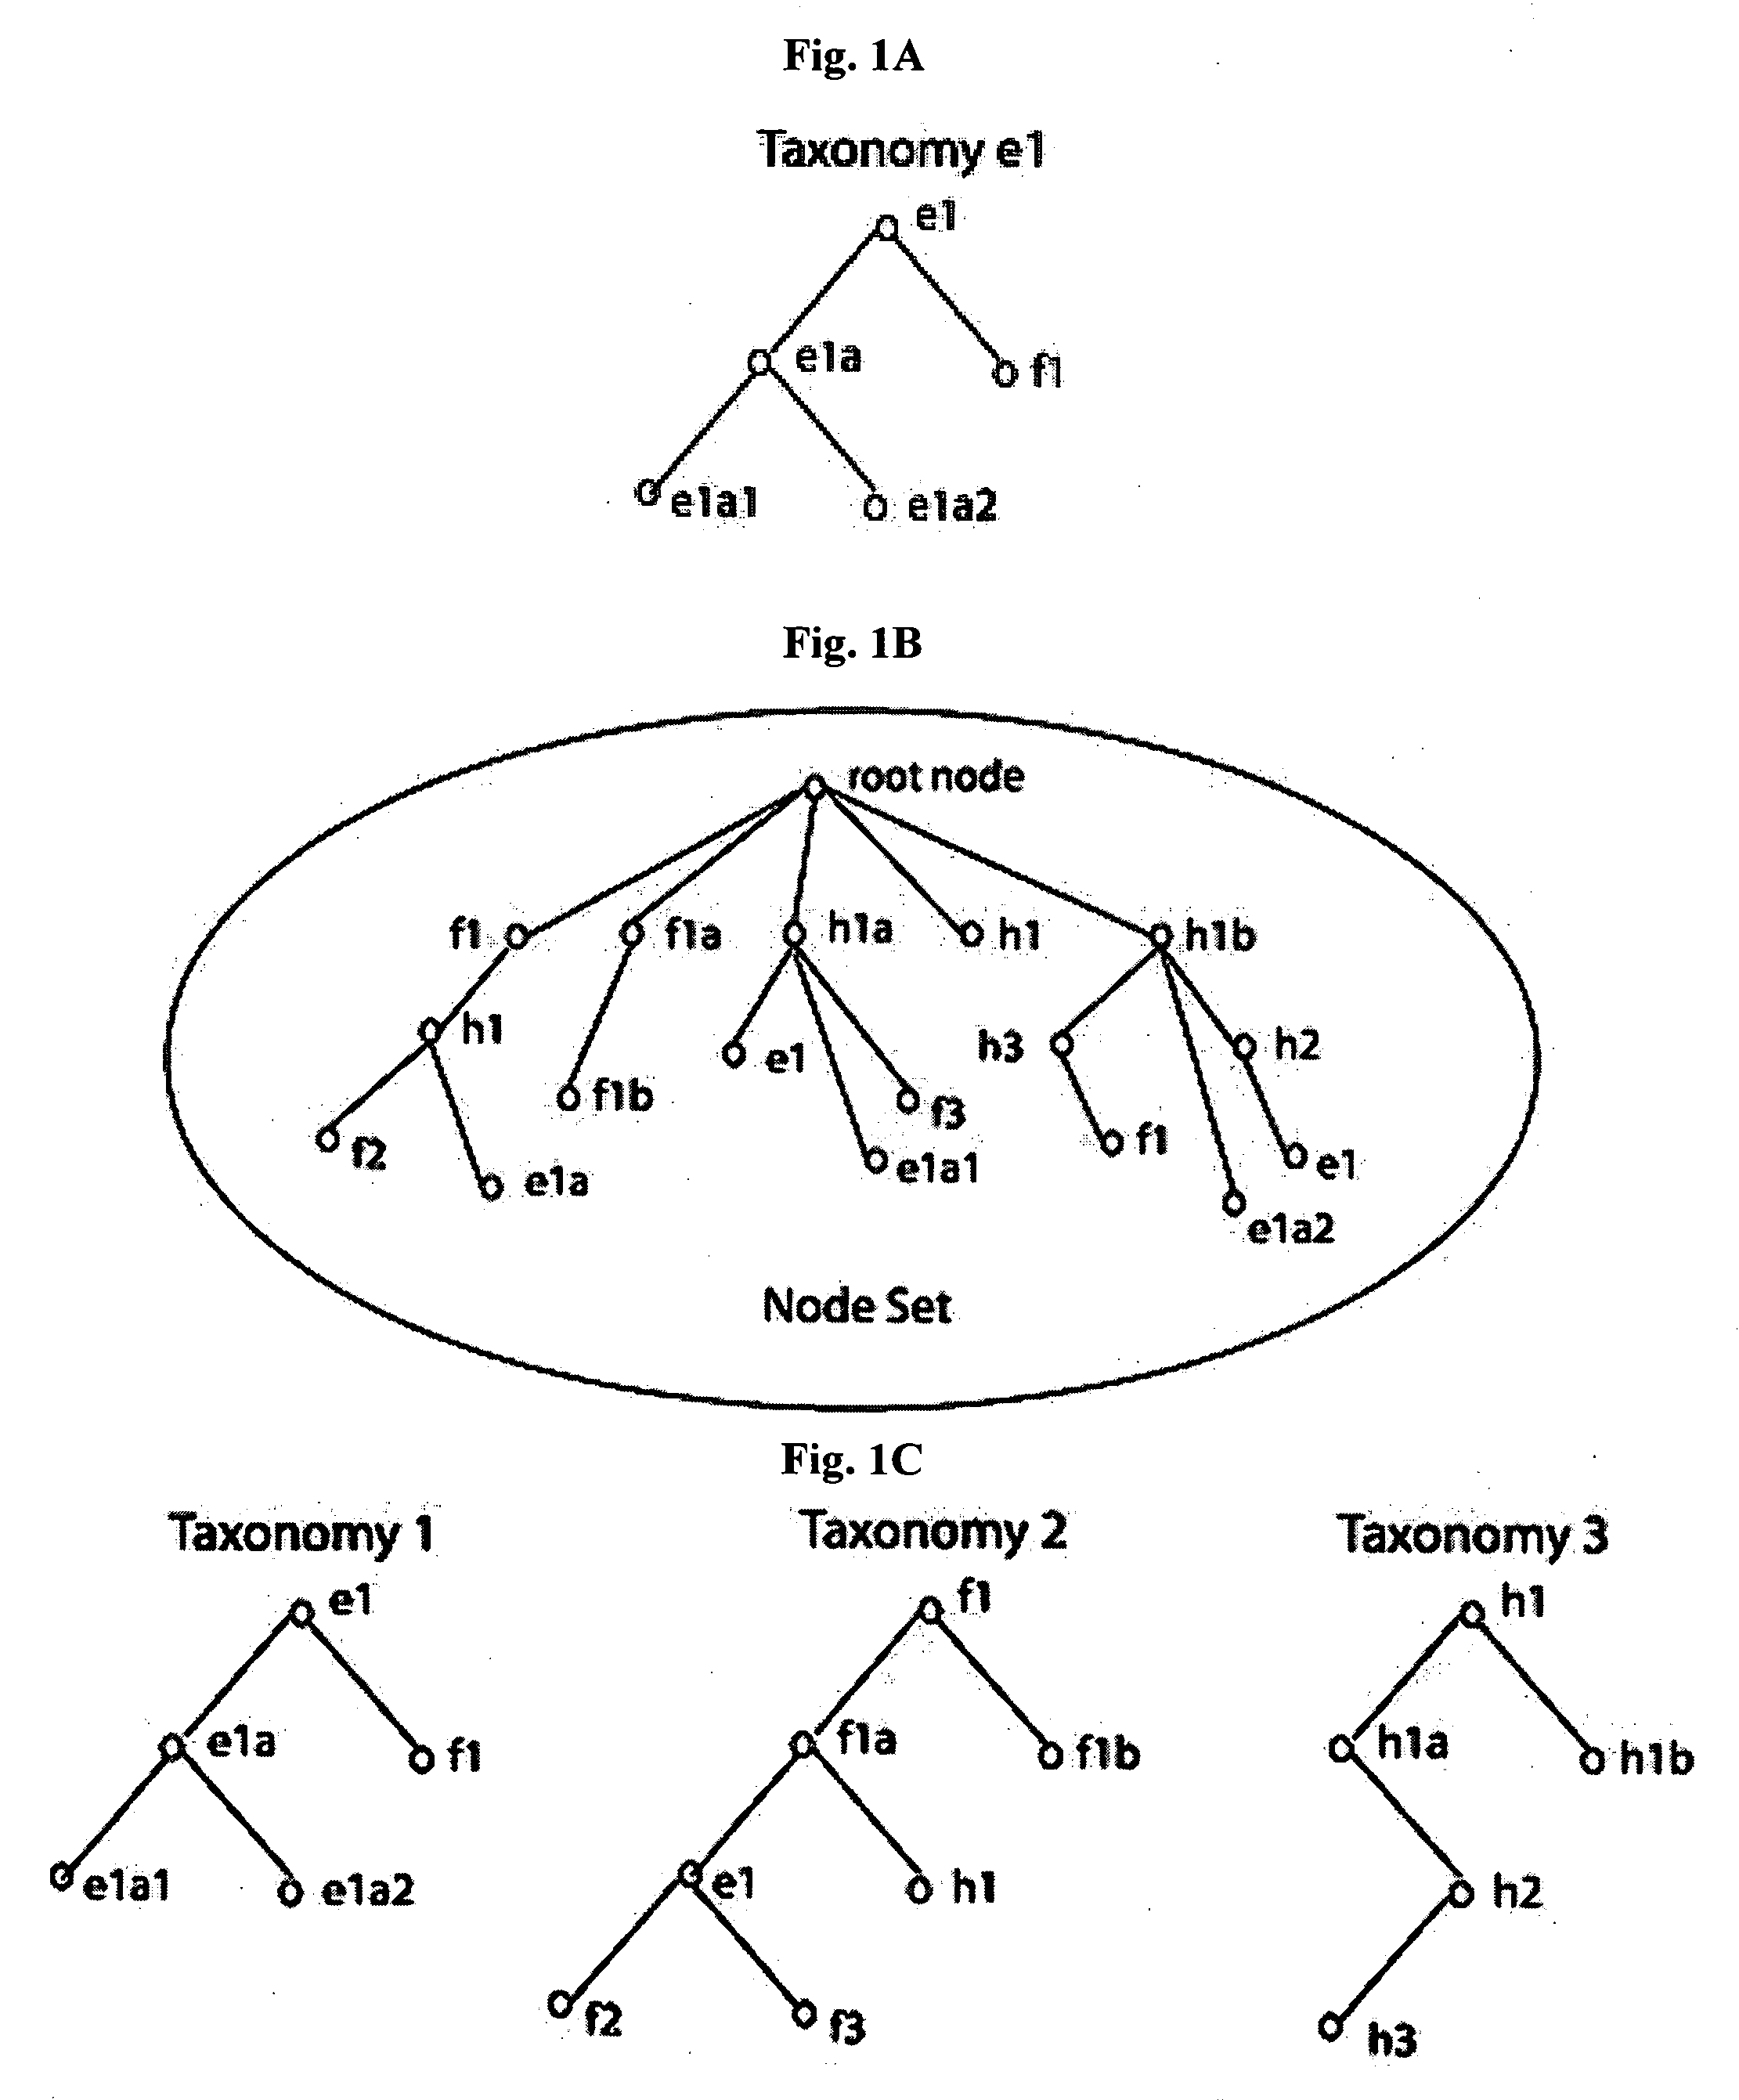 System for organizing a plurality of data sources into a plurality of taxonomies